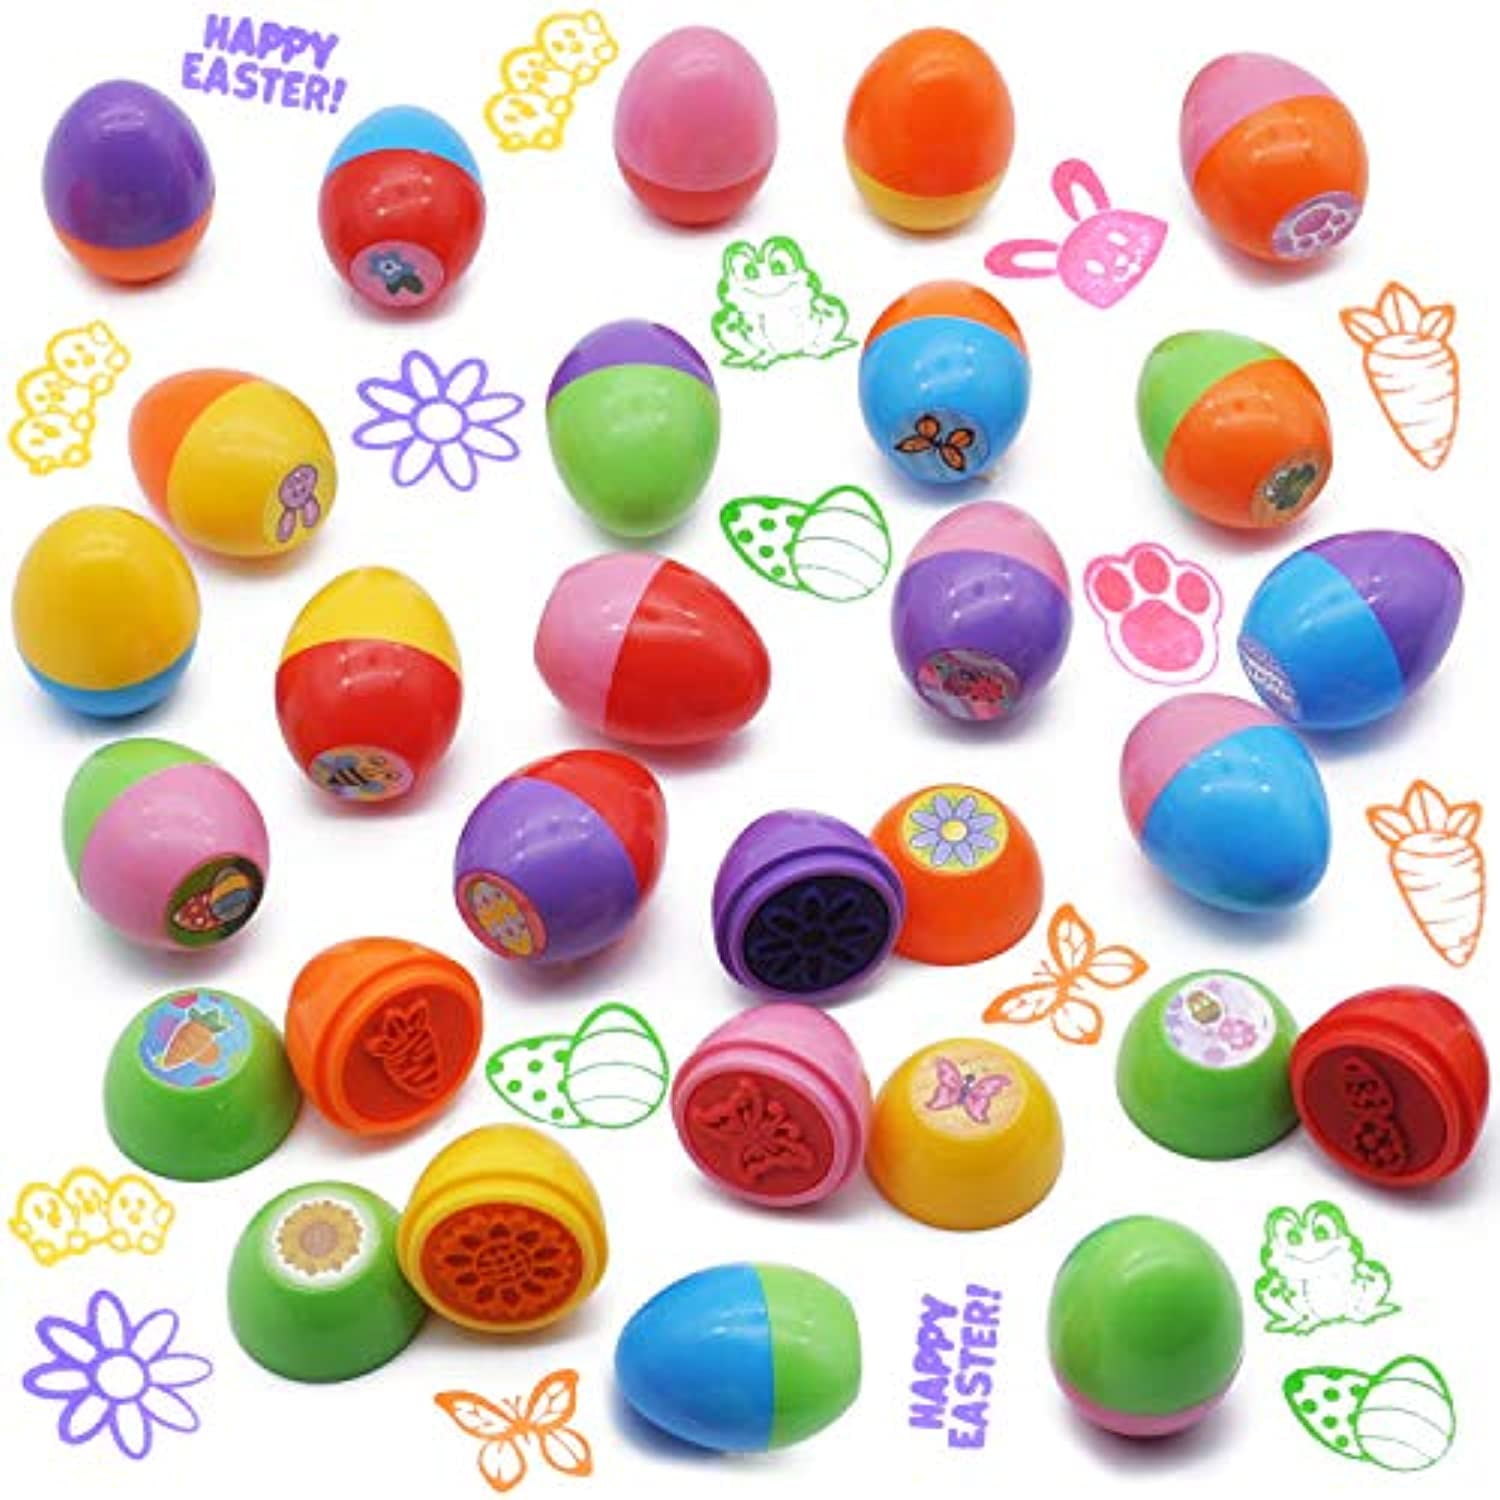 Turnada 24pcs Easter Egg Stampers Great Easter Toys For Easter Eggs Hunt Game Easter Theme Party Easter Egg Stuff Easter Basket Stuffers Fillers Easter Stamps Gifts Classroom Prize Walmart Com Walmart Com